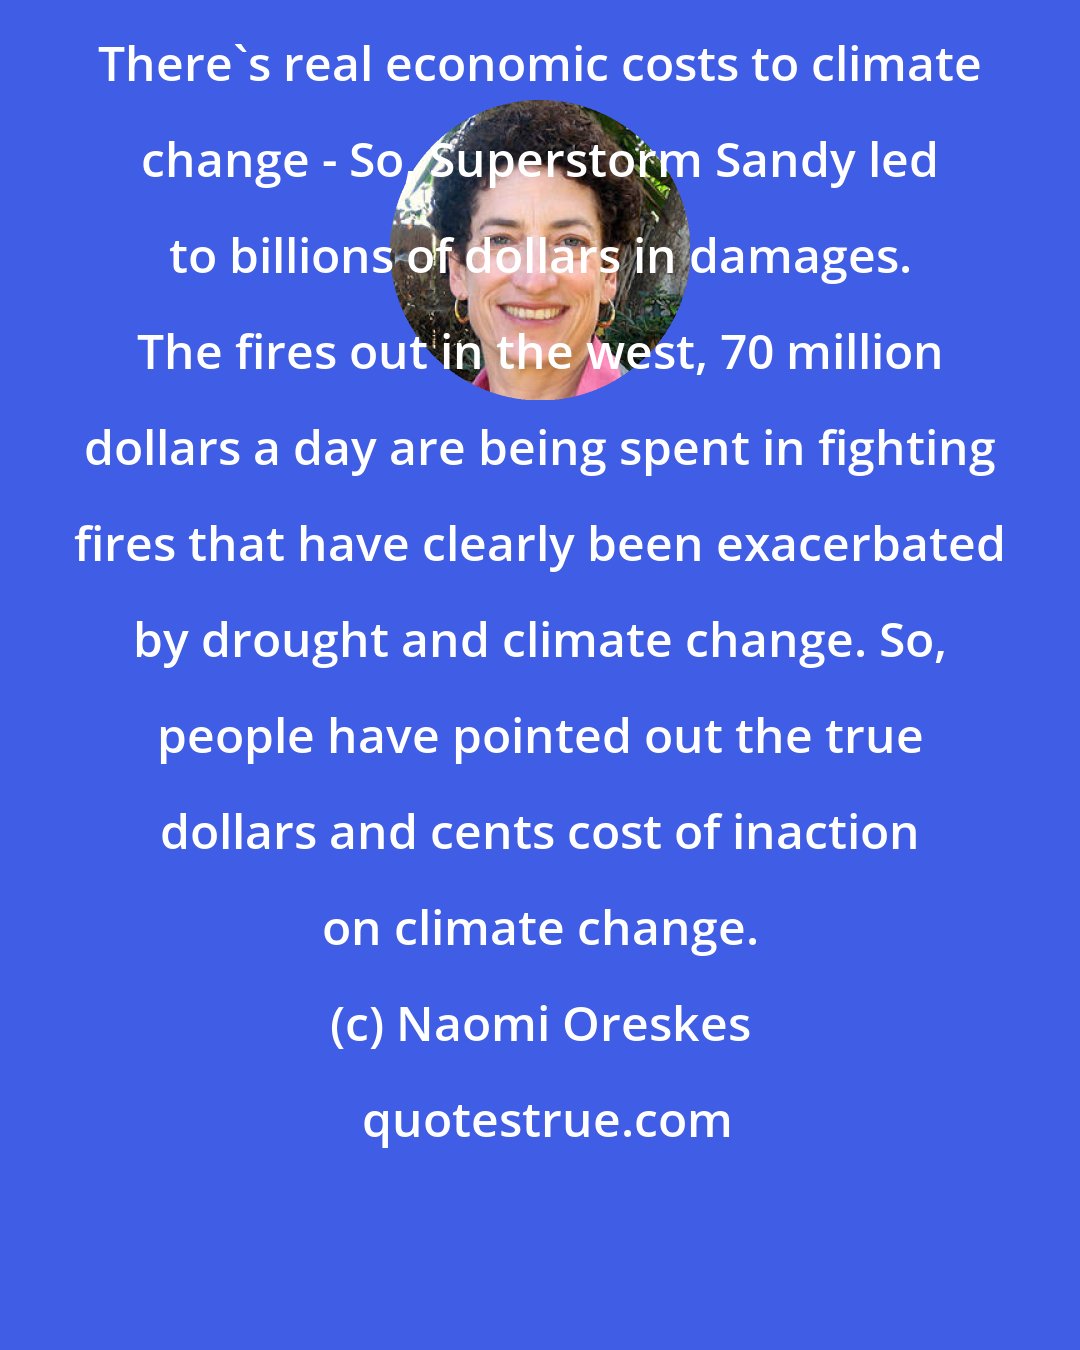 Naomi Oreskes: There's real economic costs to climate change - So, Superstorm Sandy led to billions of dollars in damages. The fires out in the west, 70 million dollars a day are being spent in fighting fires that have clearly been exacerbated by drought and climate change. So, people have pointed out the true dollars and cents cost of inaction on climate change.